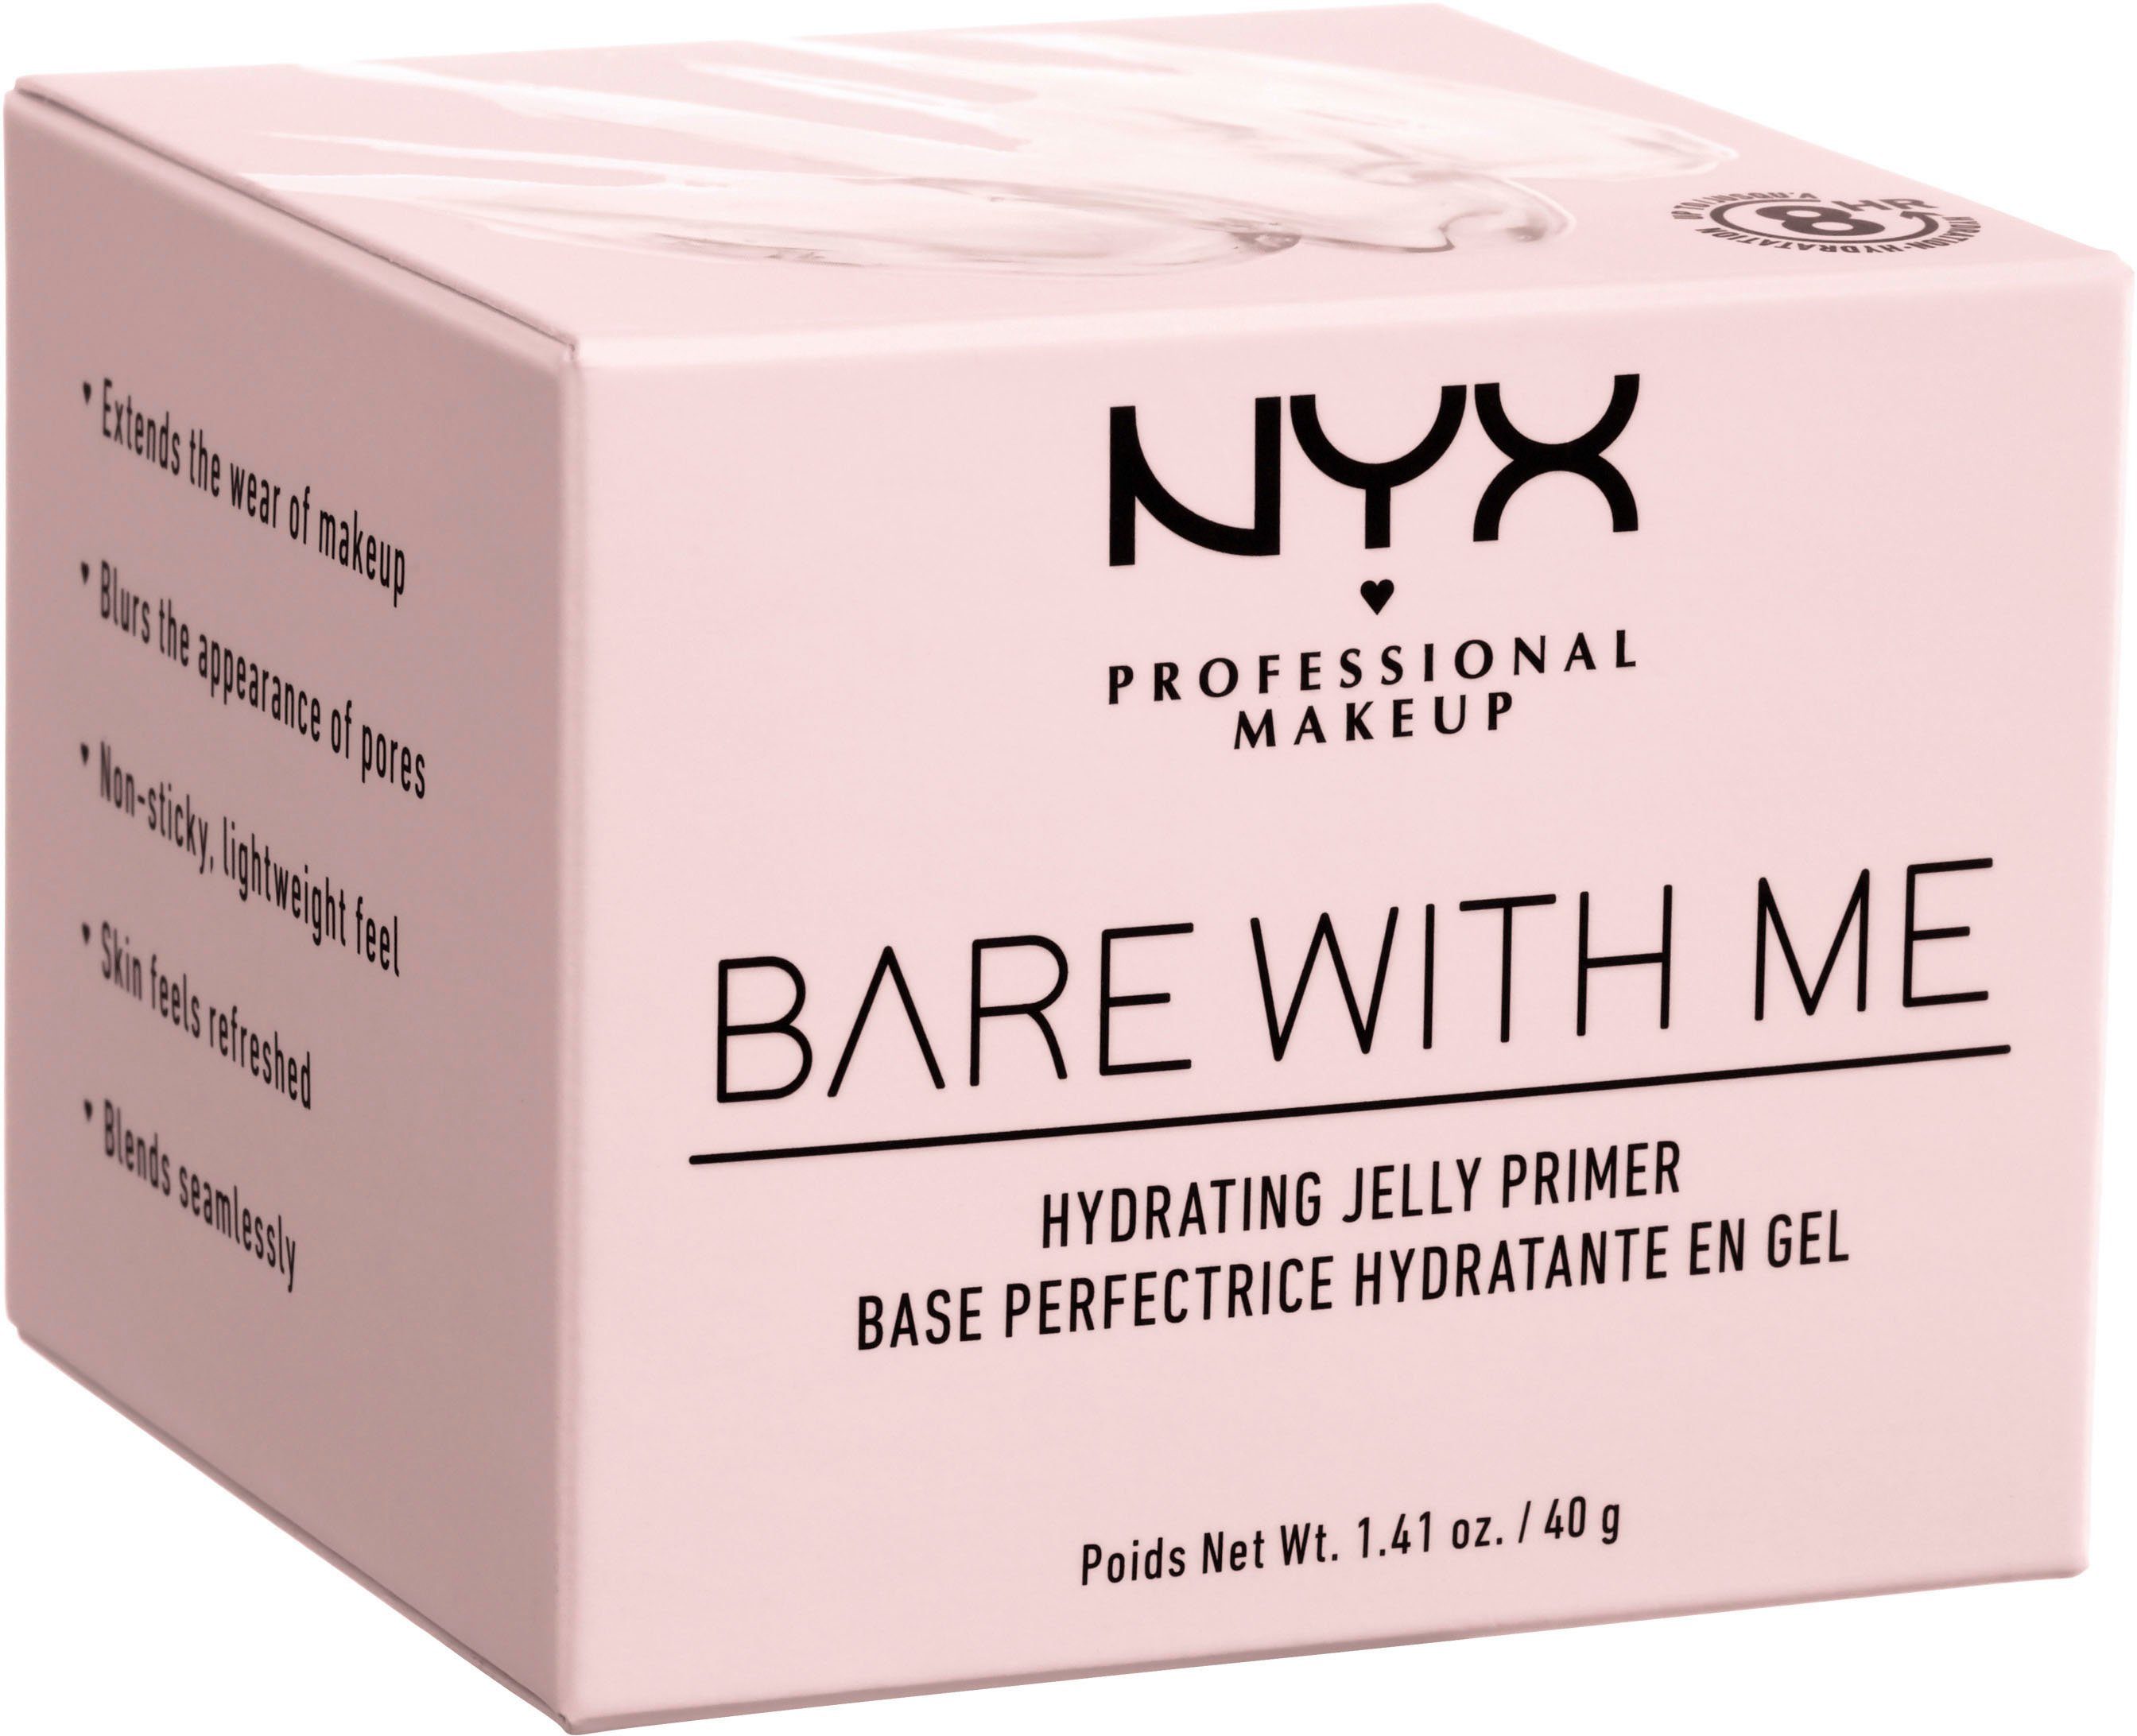 NYX Primer NYX Me Hydrating Jelly Bare With Makeup Professional Primer